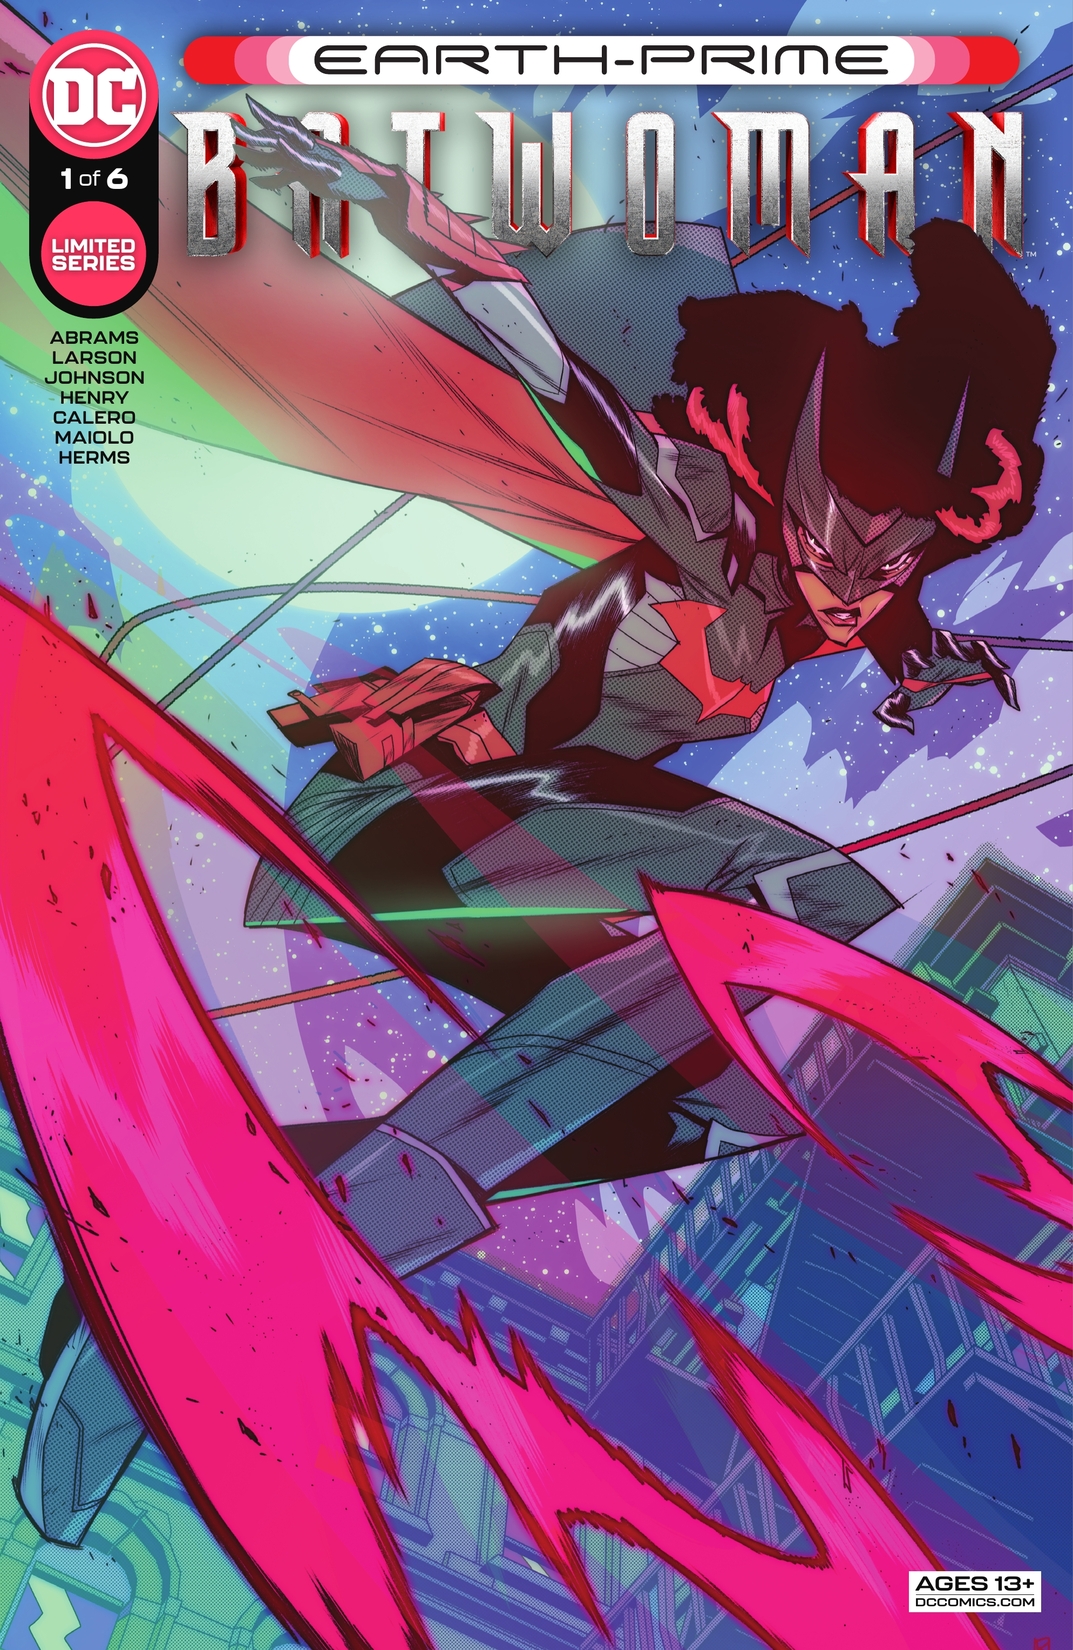 Earth-Prime: Batwoman #1 preview images